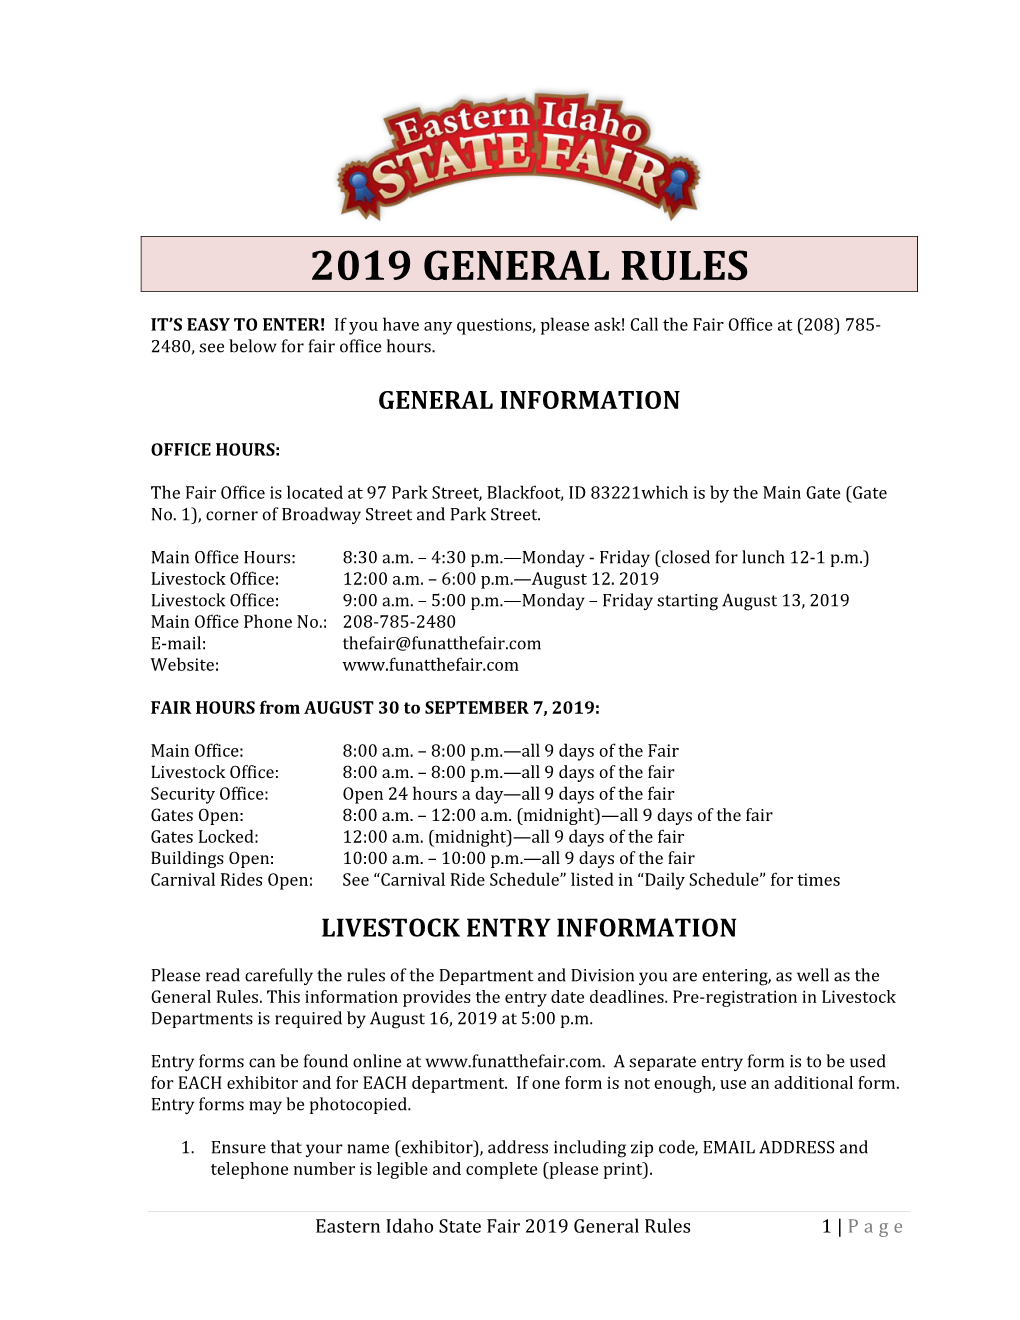 2019 General Rules